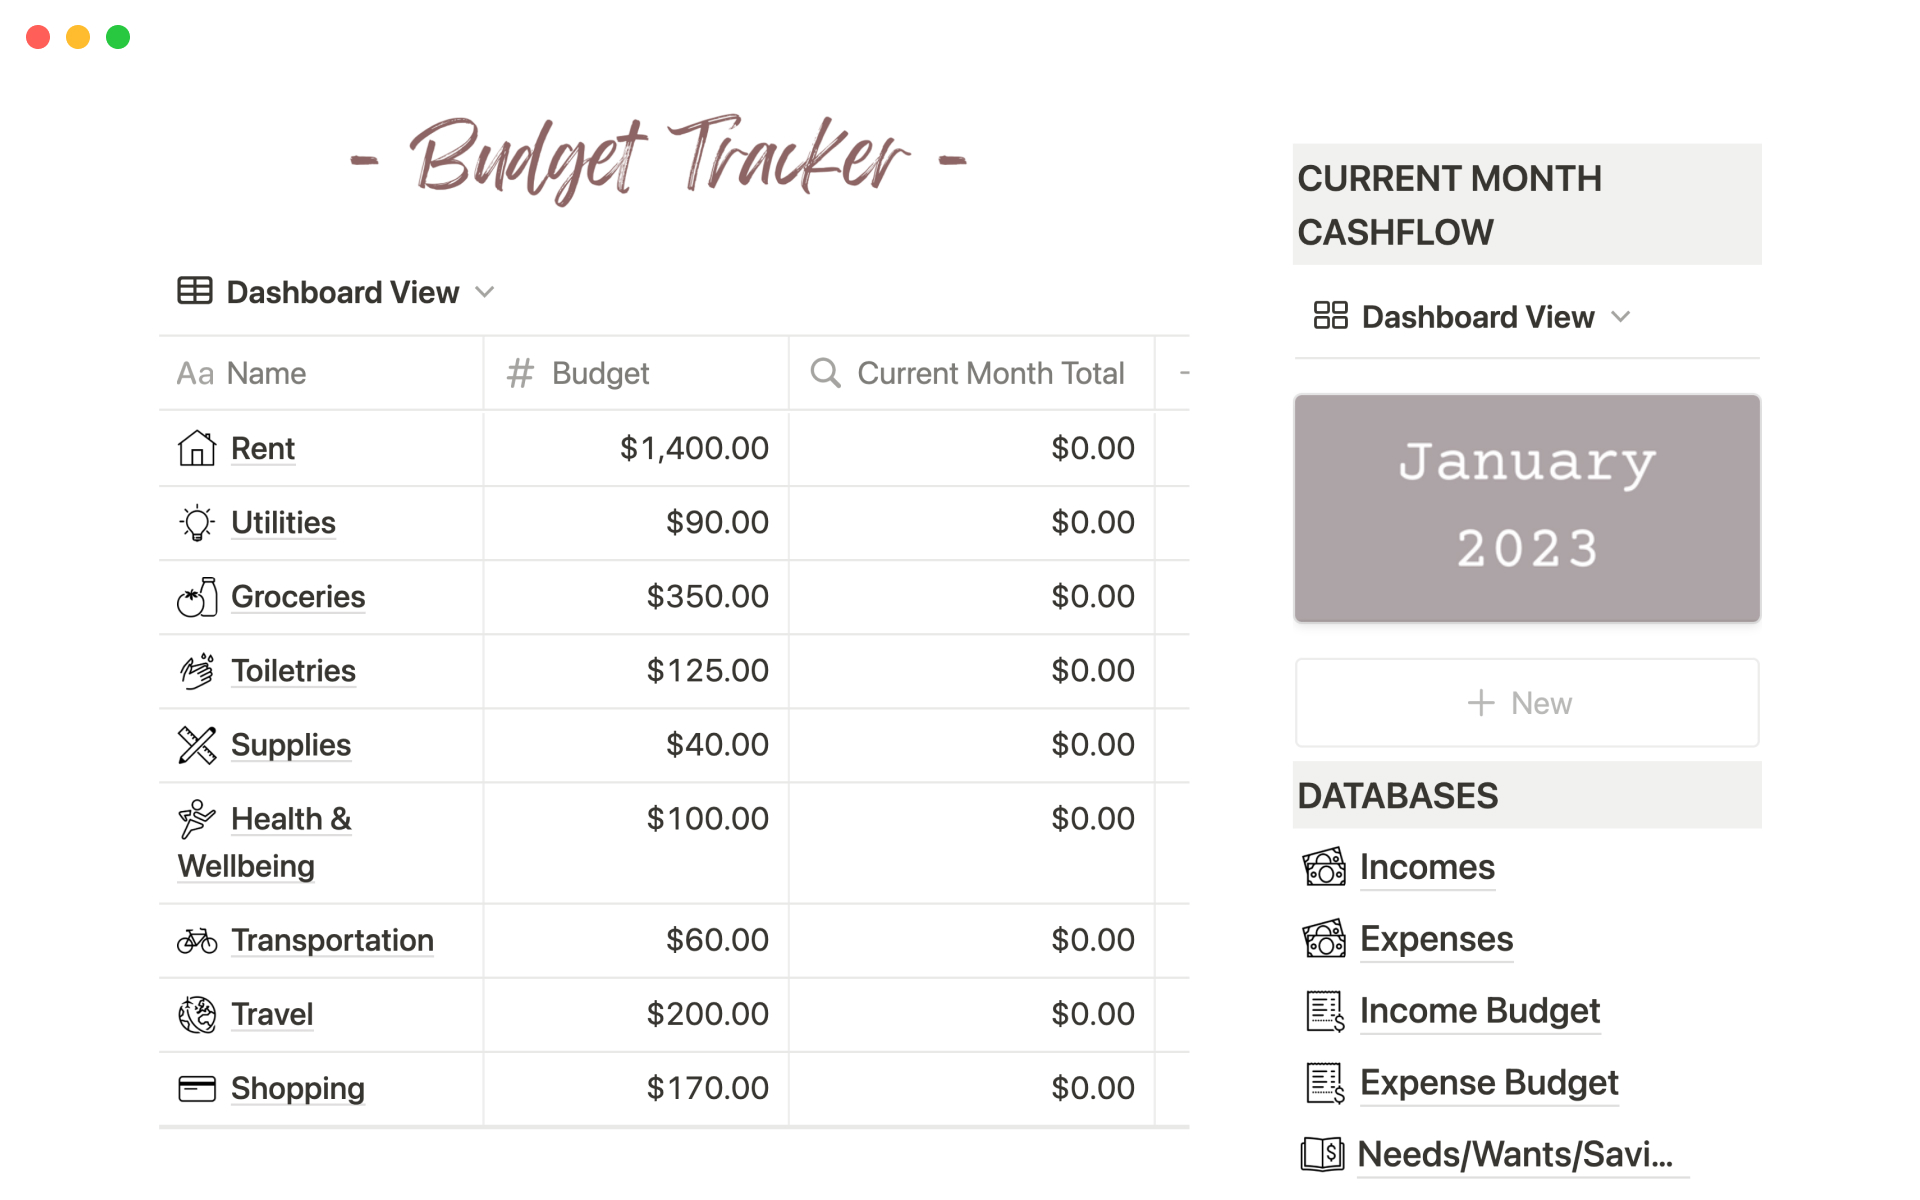 Track your expenses and income to help you stick to your budget.